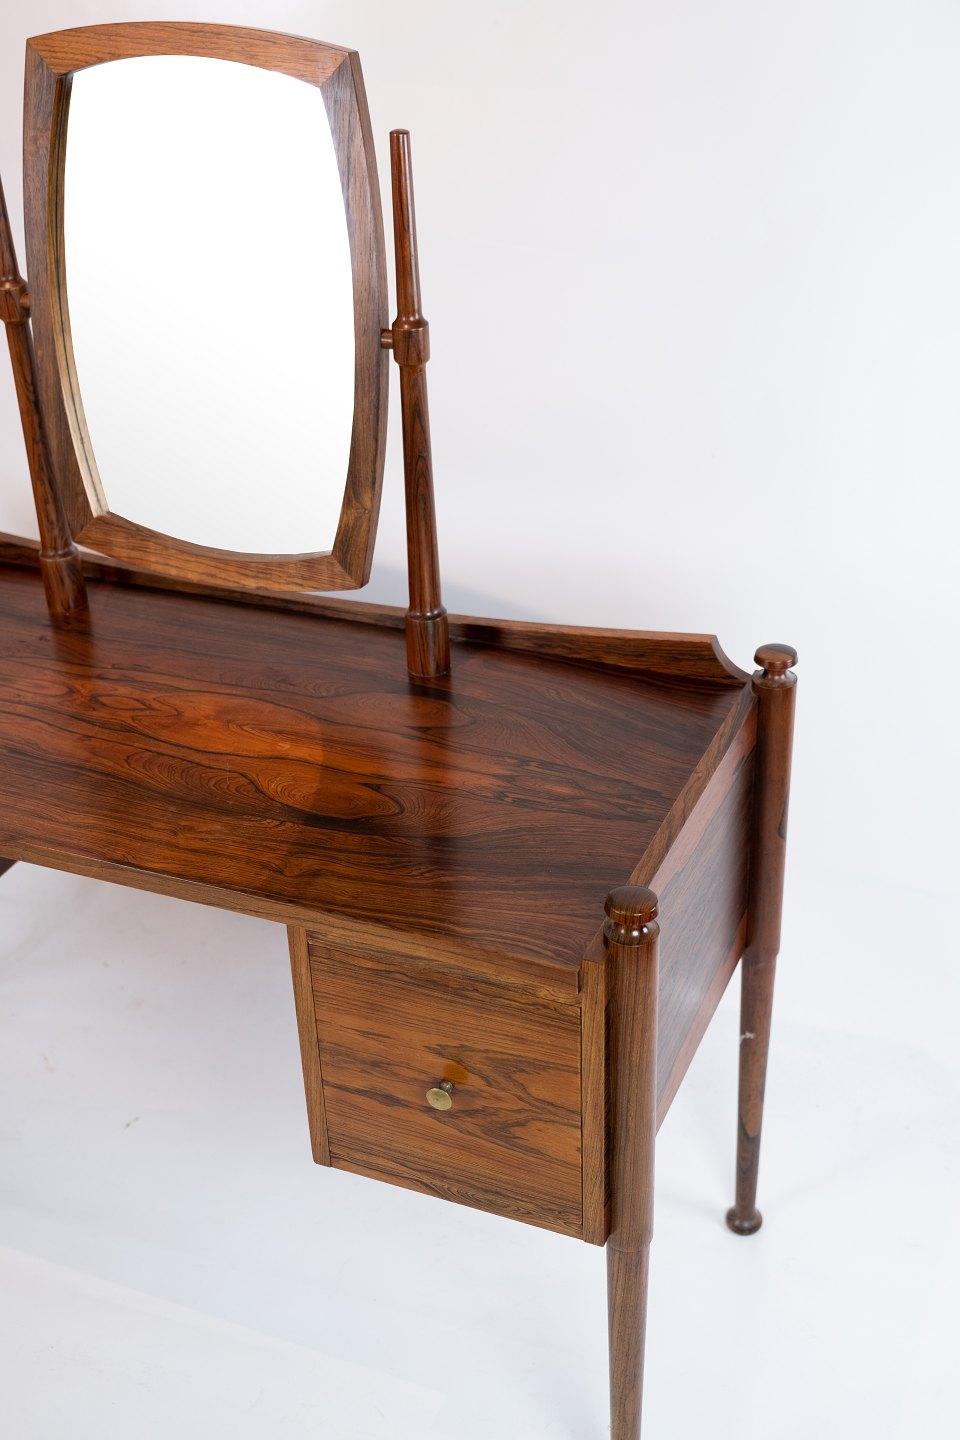 Dressing table in rosewood designed by Chr. Linneberg from the 1960s. The table is in great vintage condition.